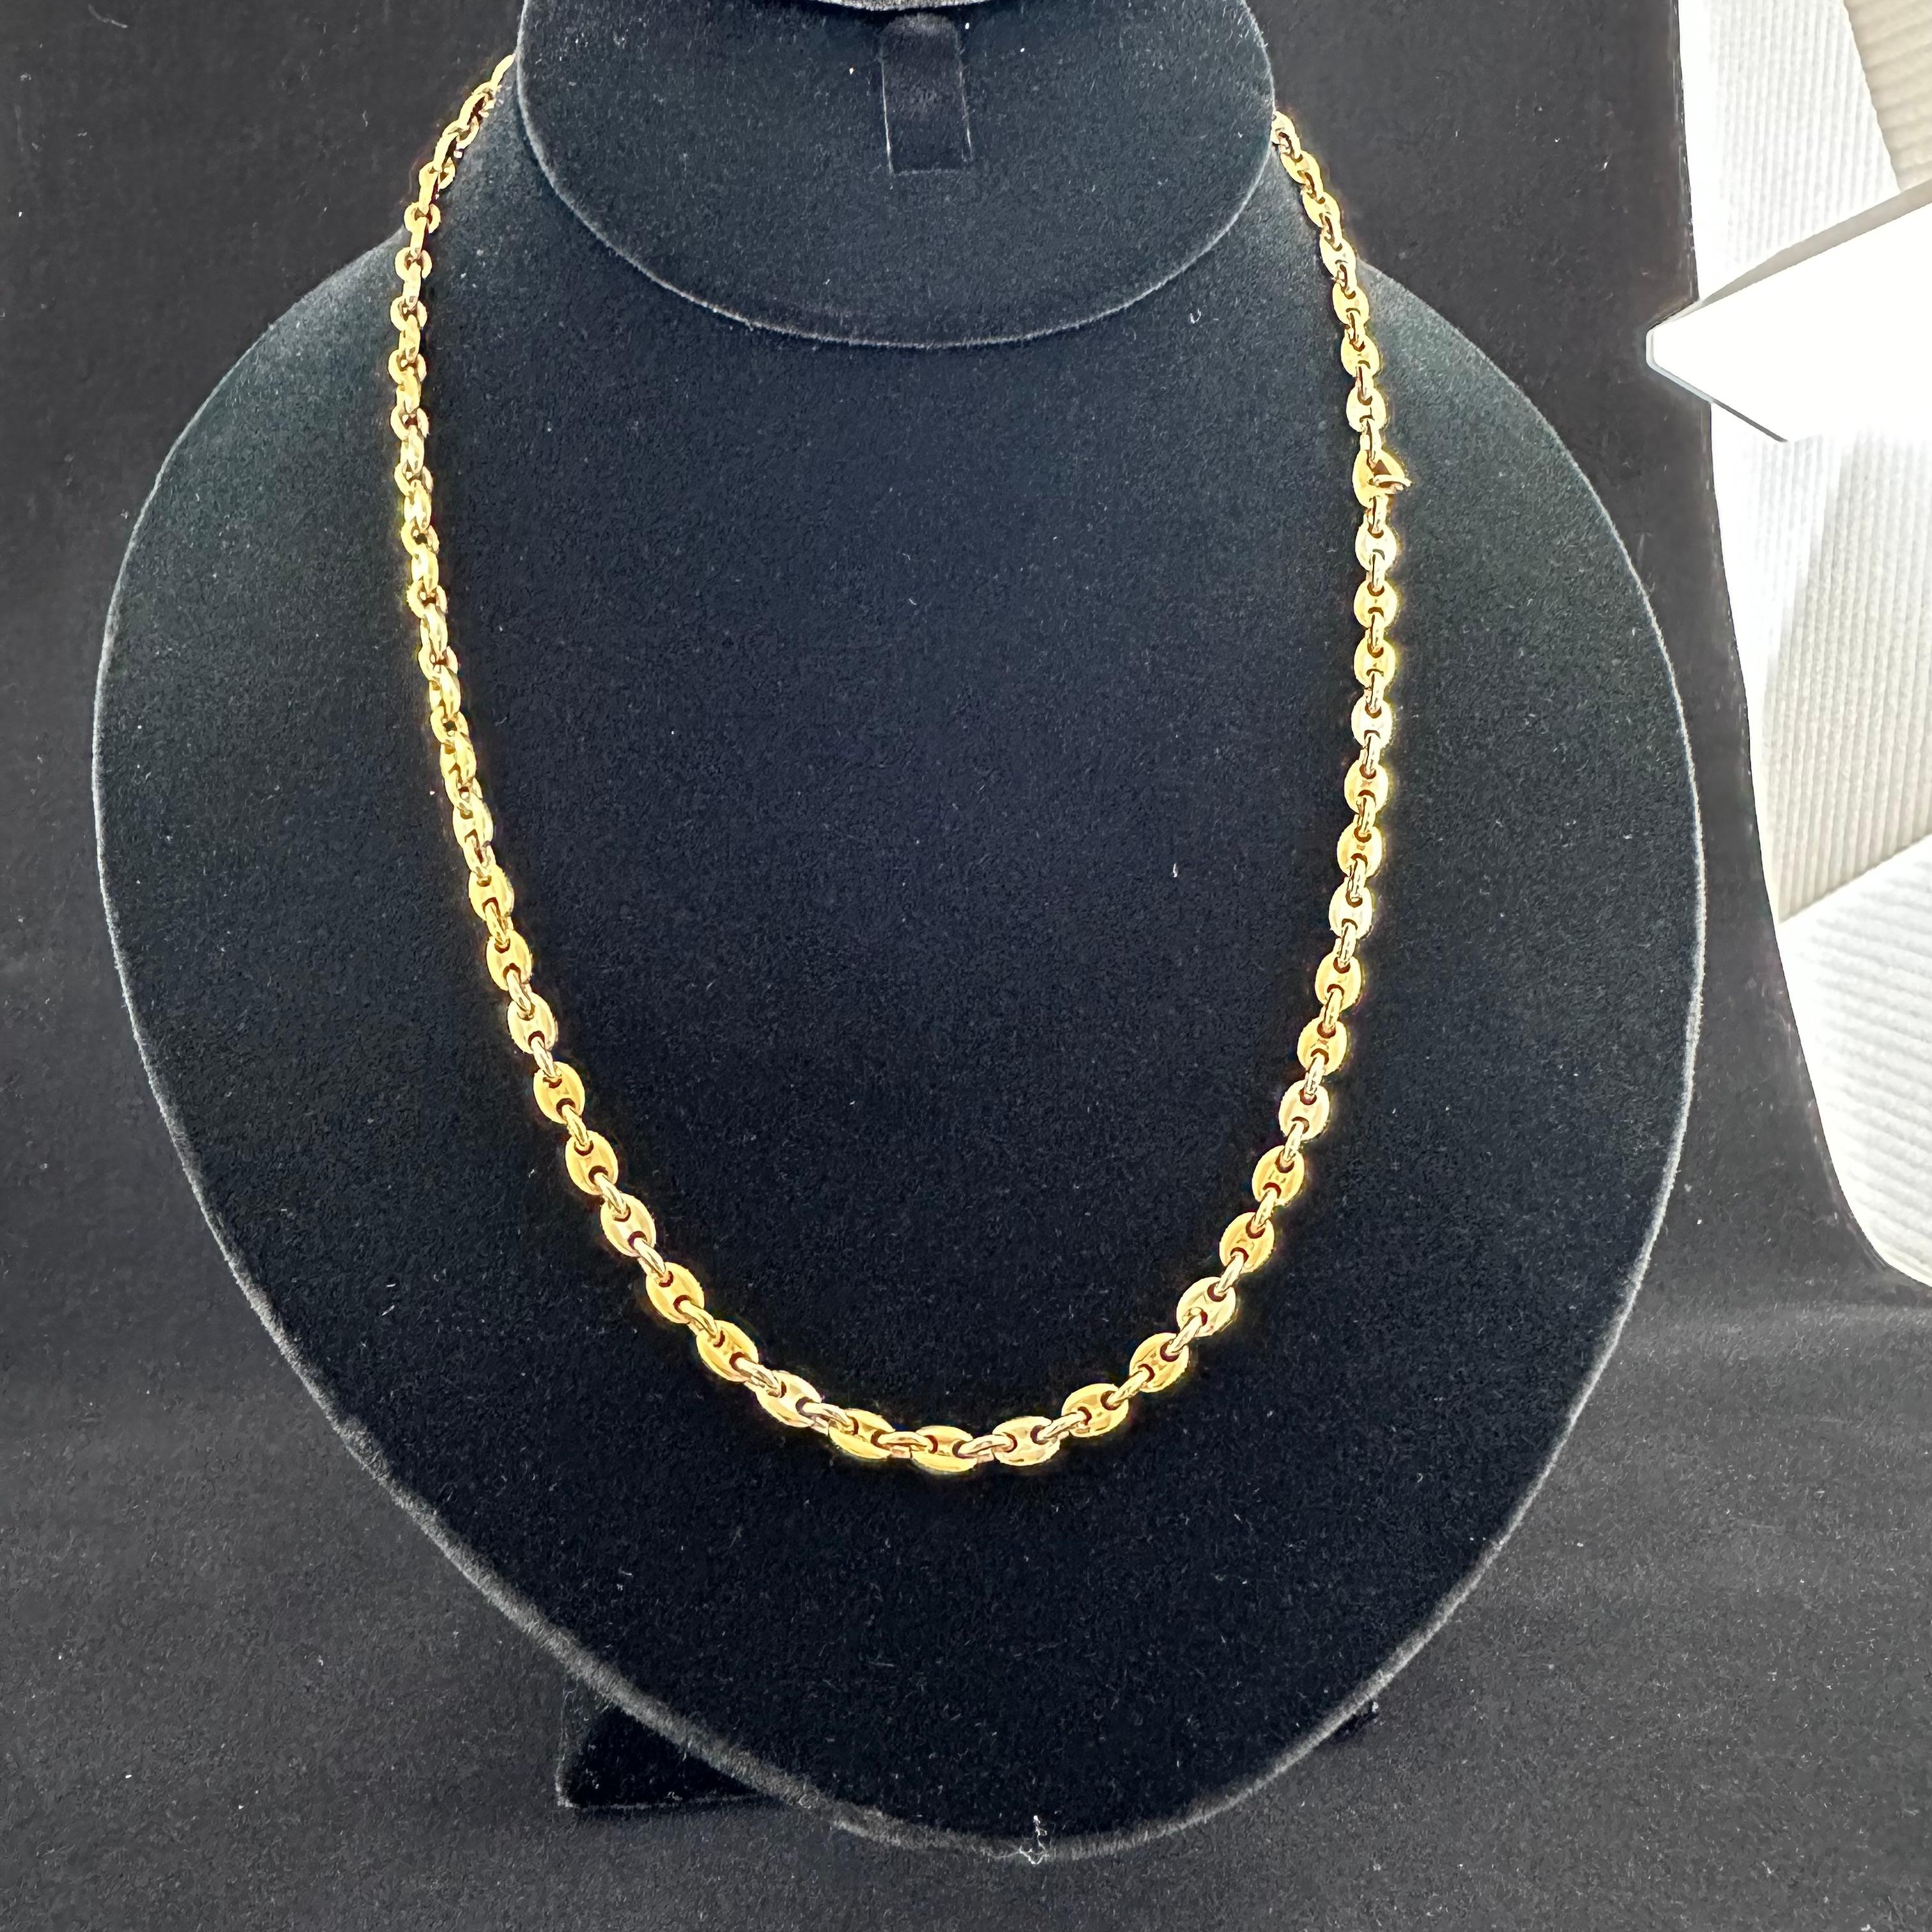 Cartier Vintage 18k Yellow and White Link Chain
39.8 grams 18 inches Long , Each Link is 5mm width.
The chain has a Yellow Gold Look as there are 2 Yellow Gold Link and one White Link so the over all appearance of the chain is yellow. 20.5 Inches